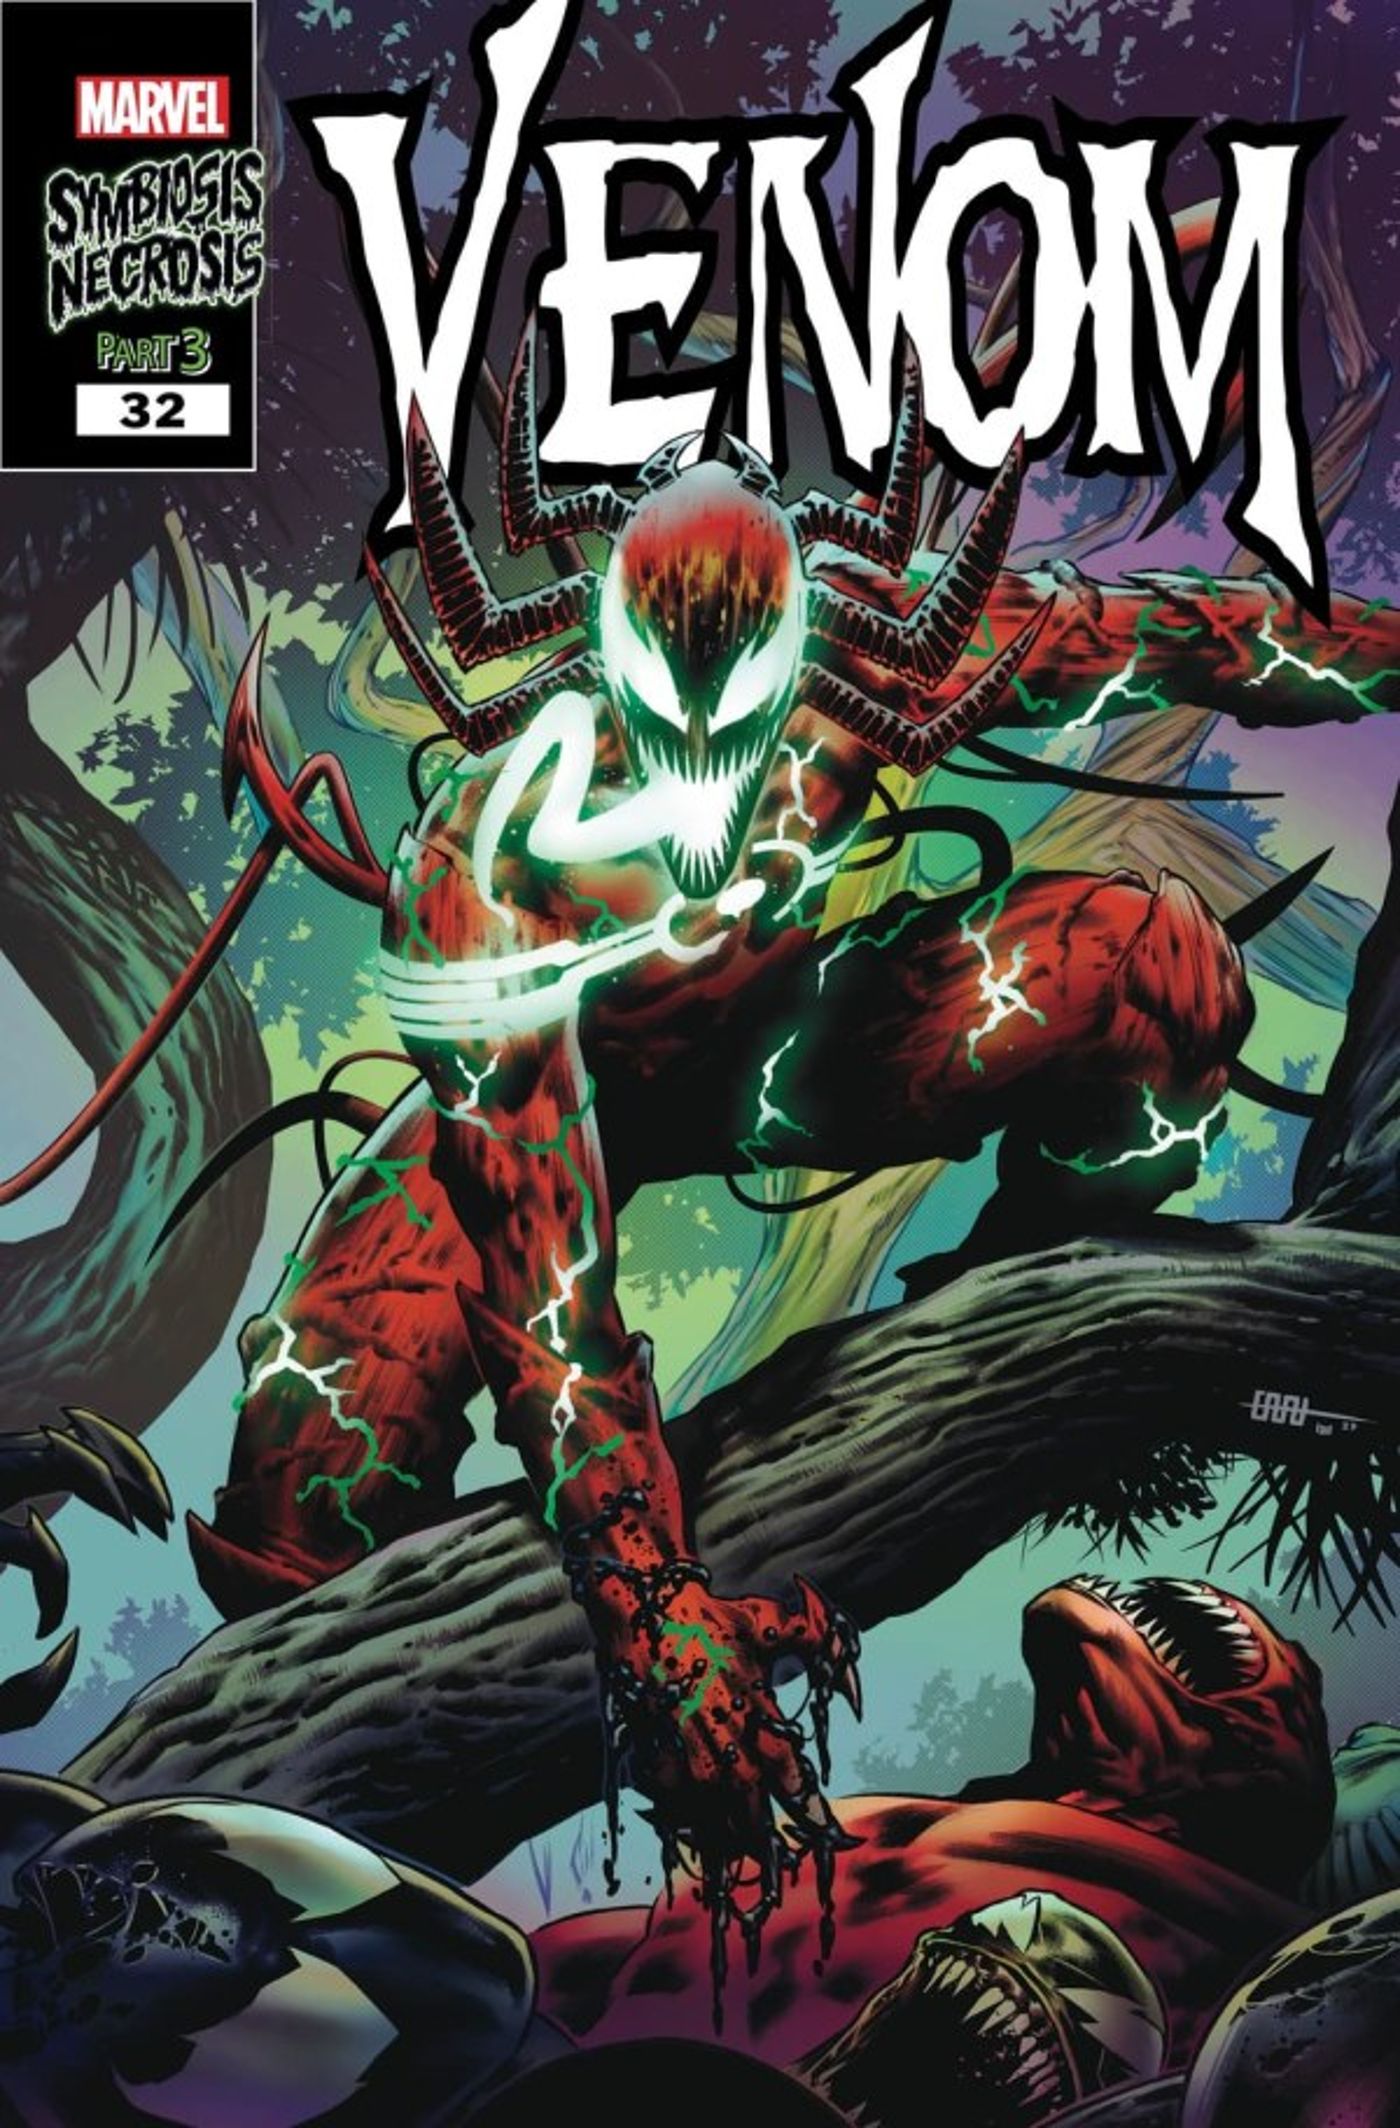 Venom #32 main cover by CAFU, featuring Carnage